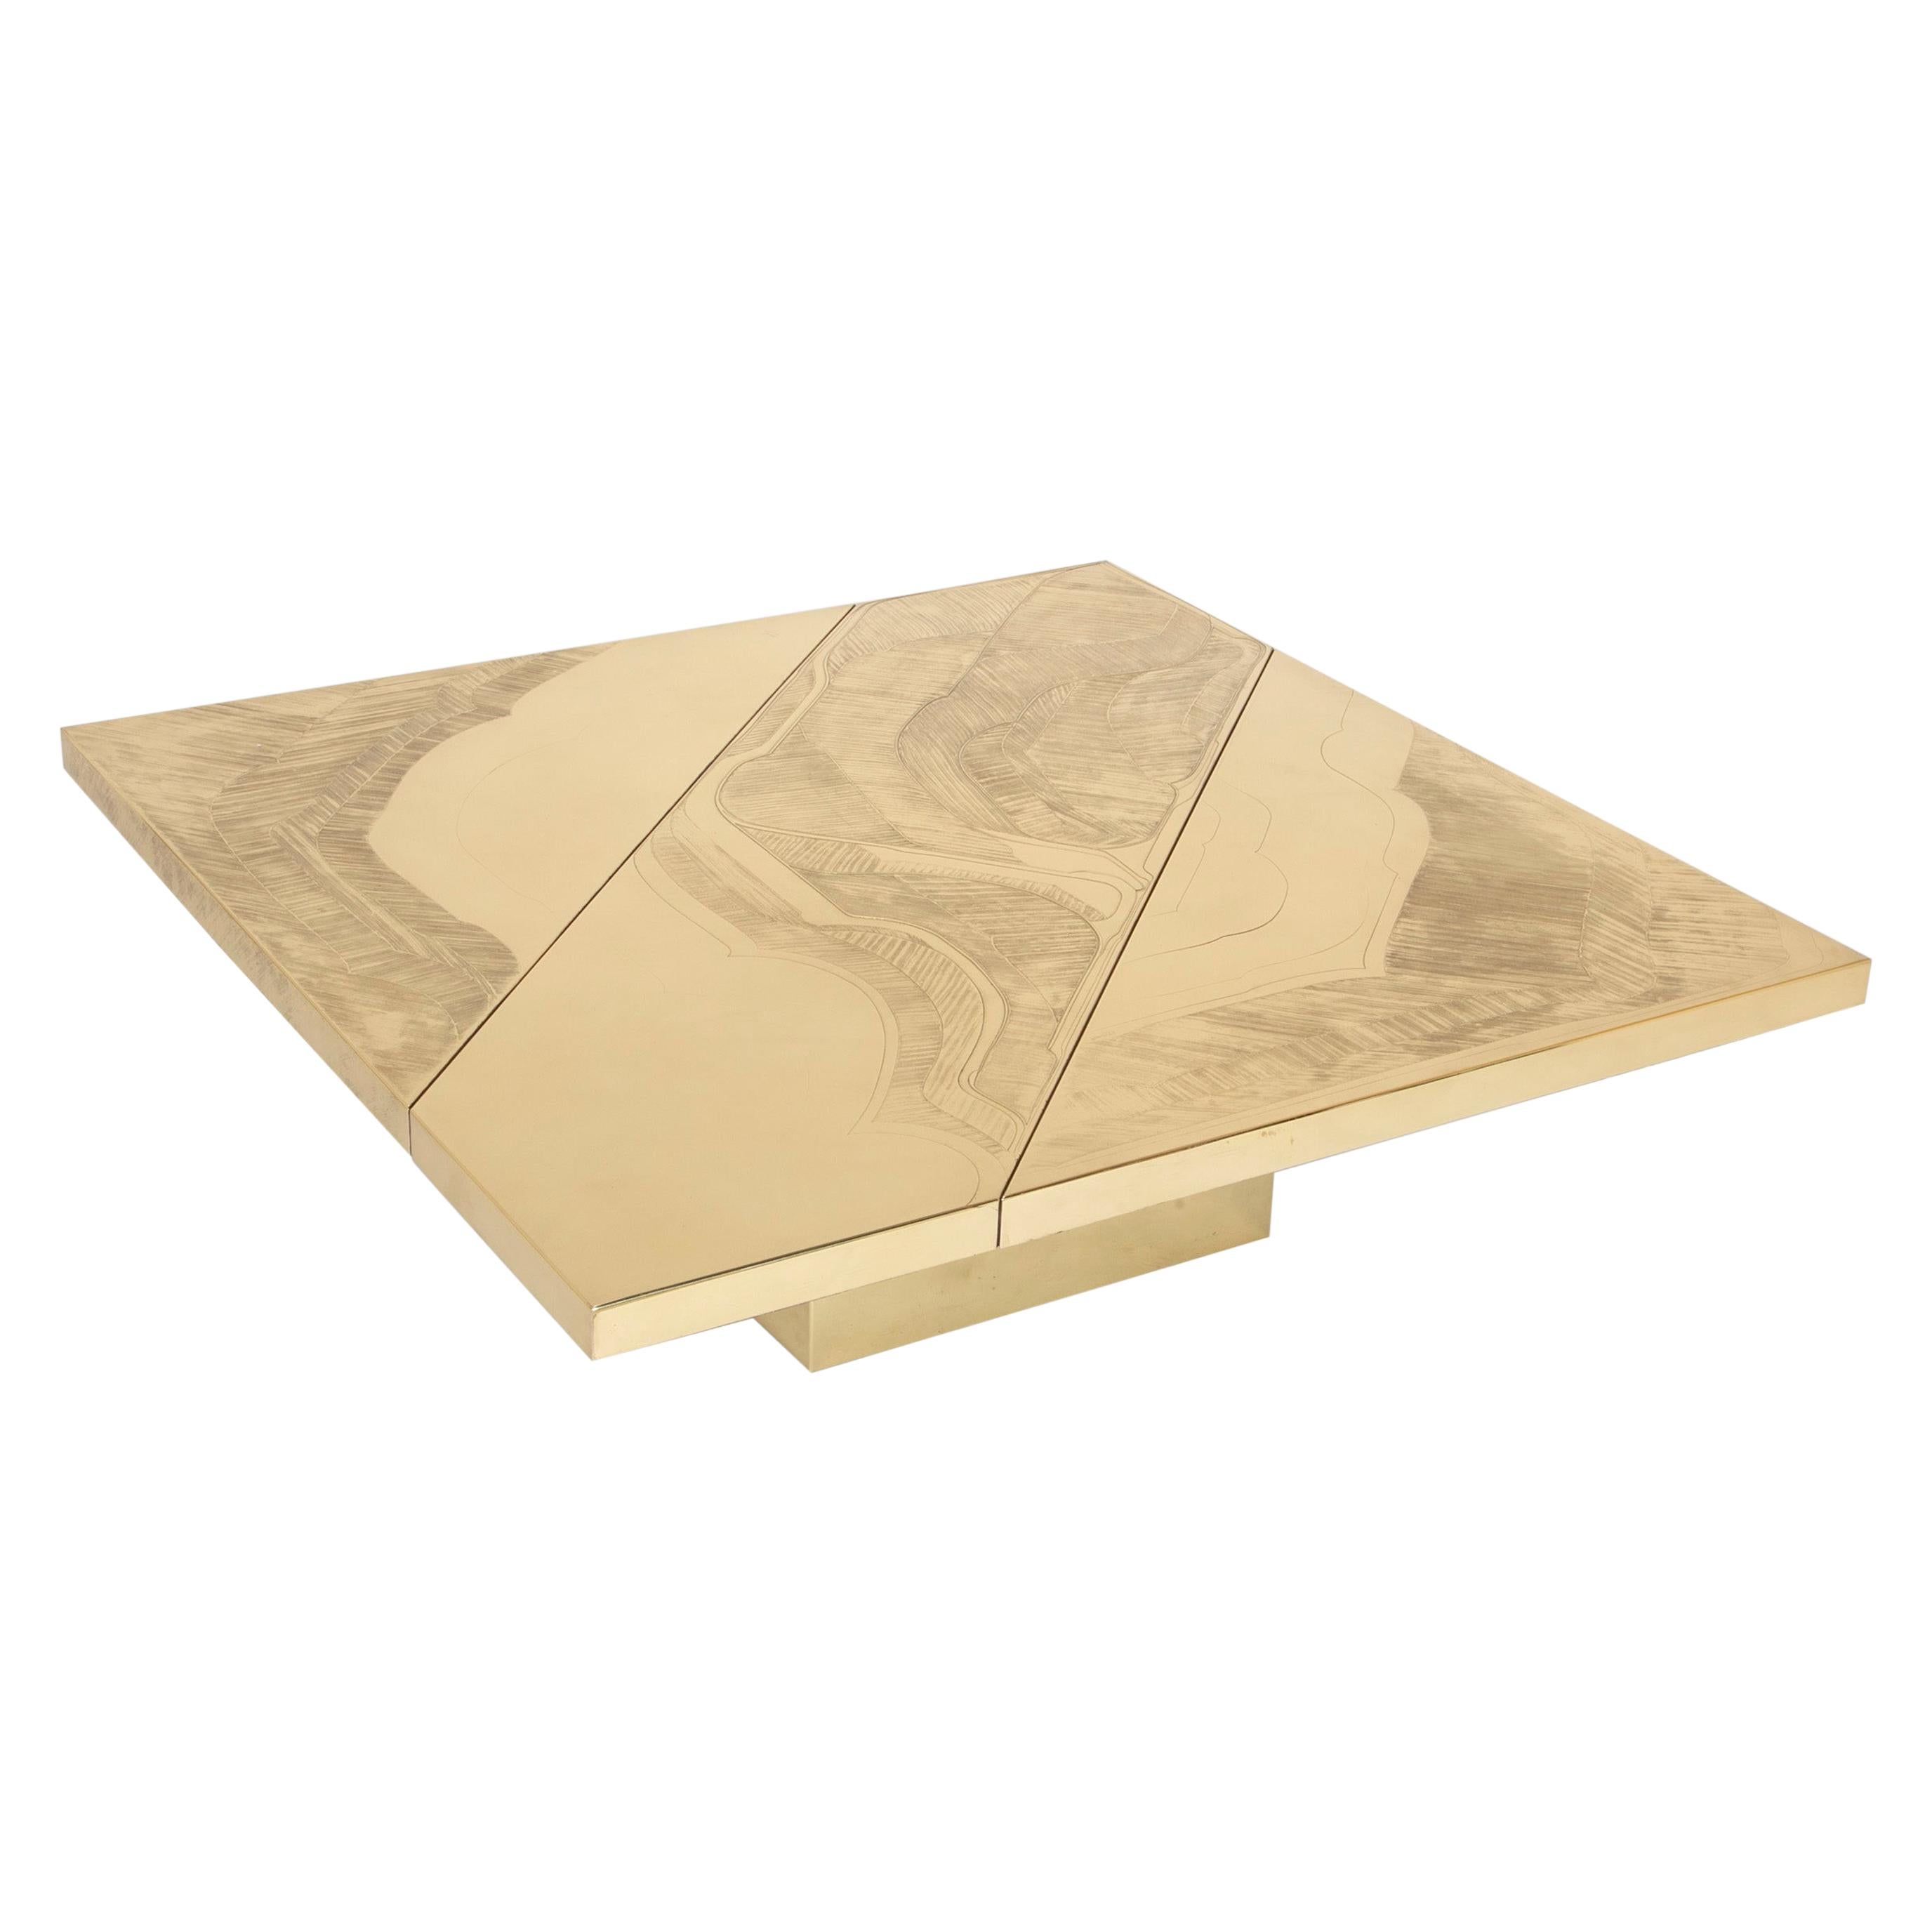 Square Acid Etched Brass Table by Jenalzi For Sale